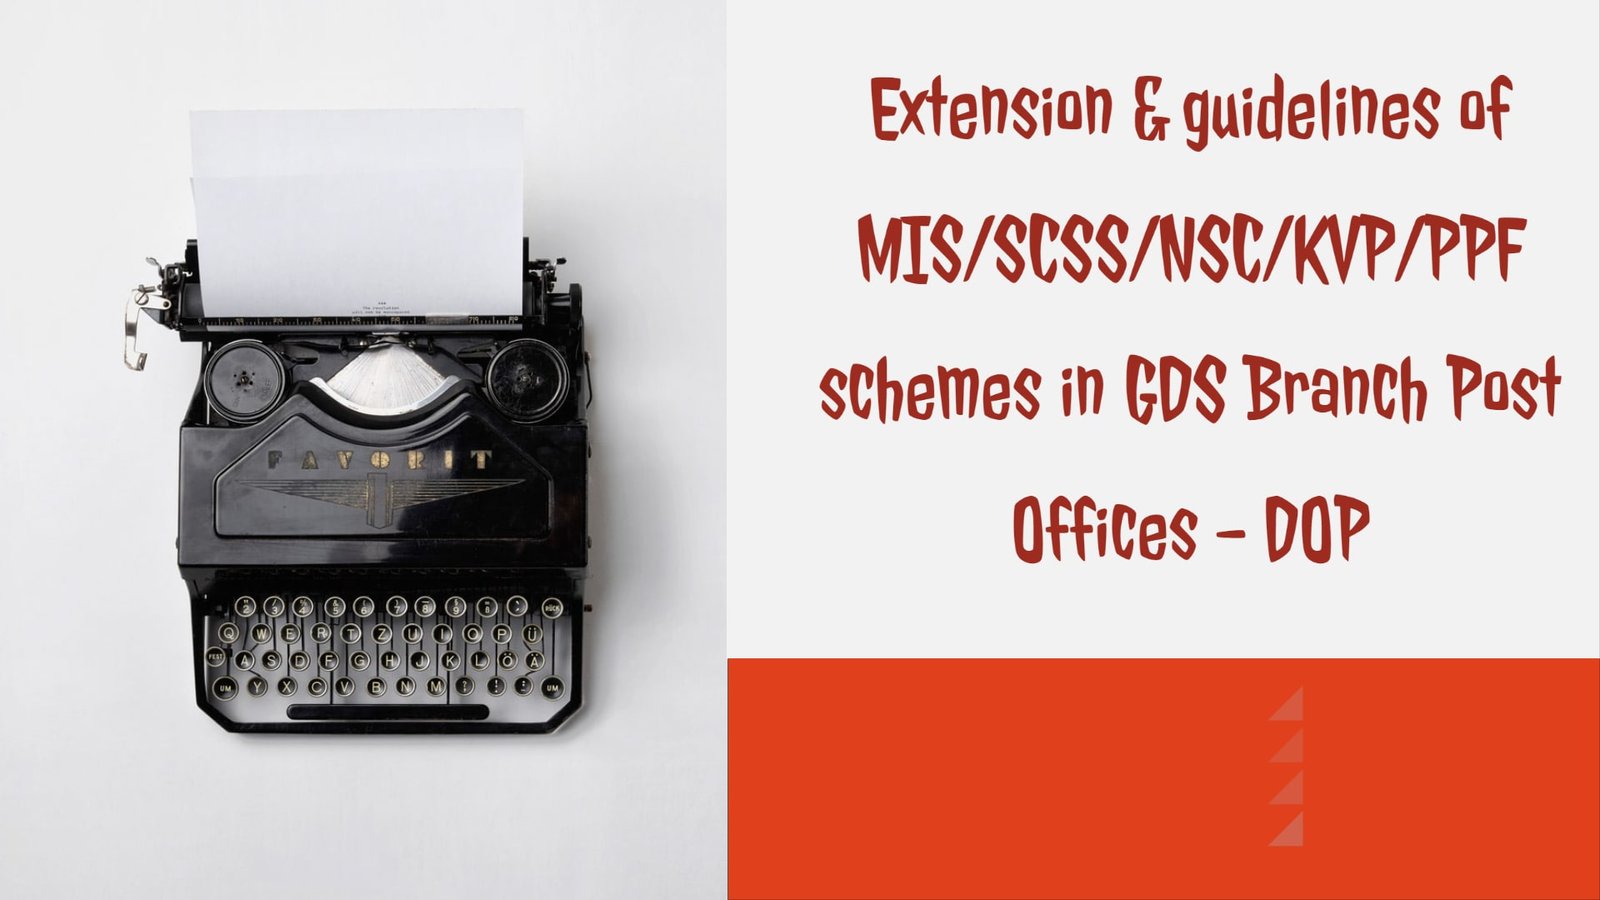 Extension & guidelines of MIS_SCSS_NSC_KVP_PPF schemes in GDS Branch Post Offices - DOP